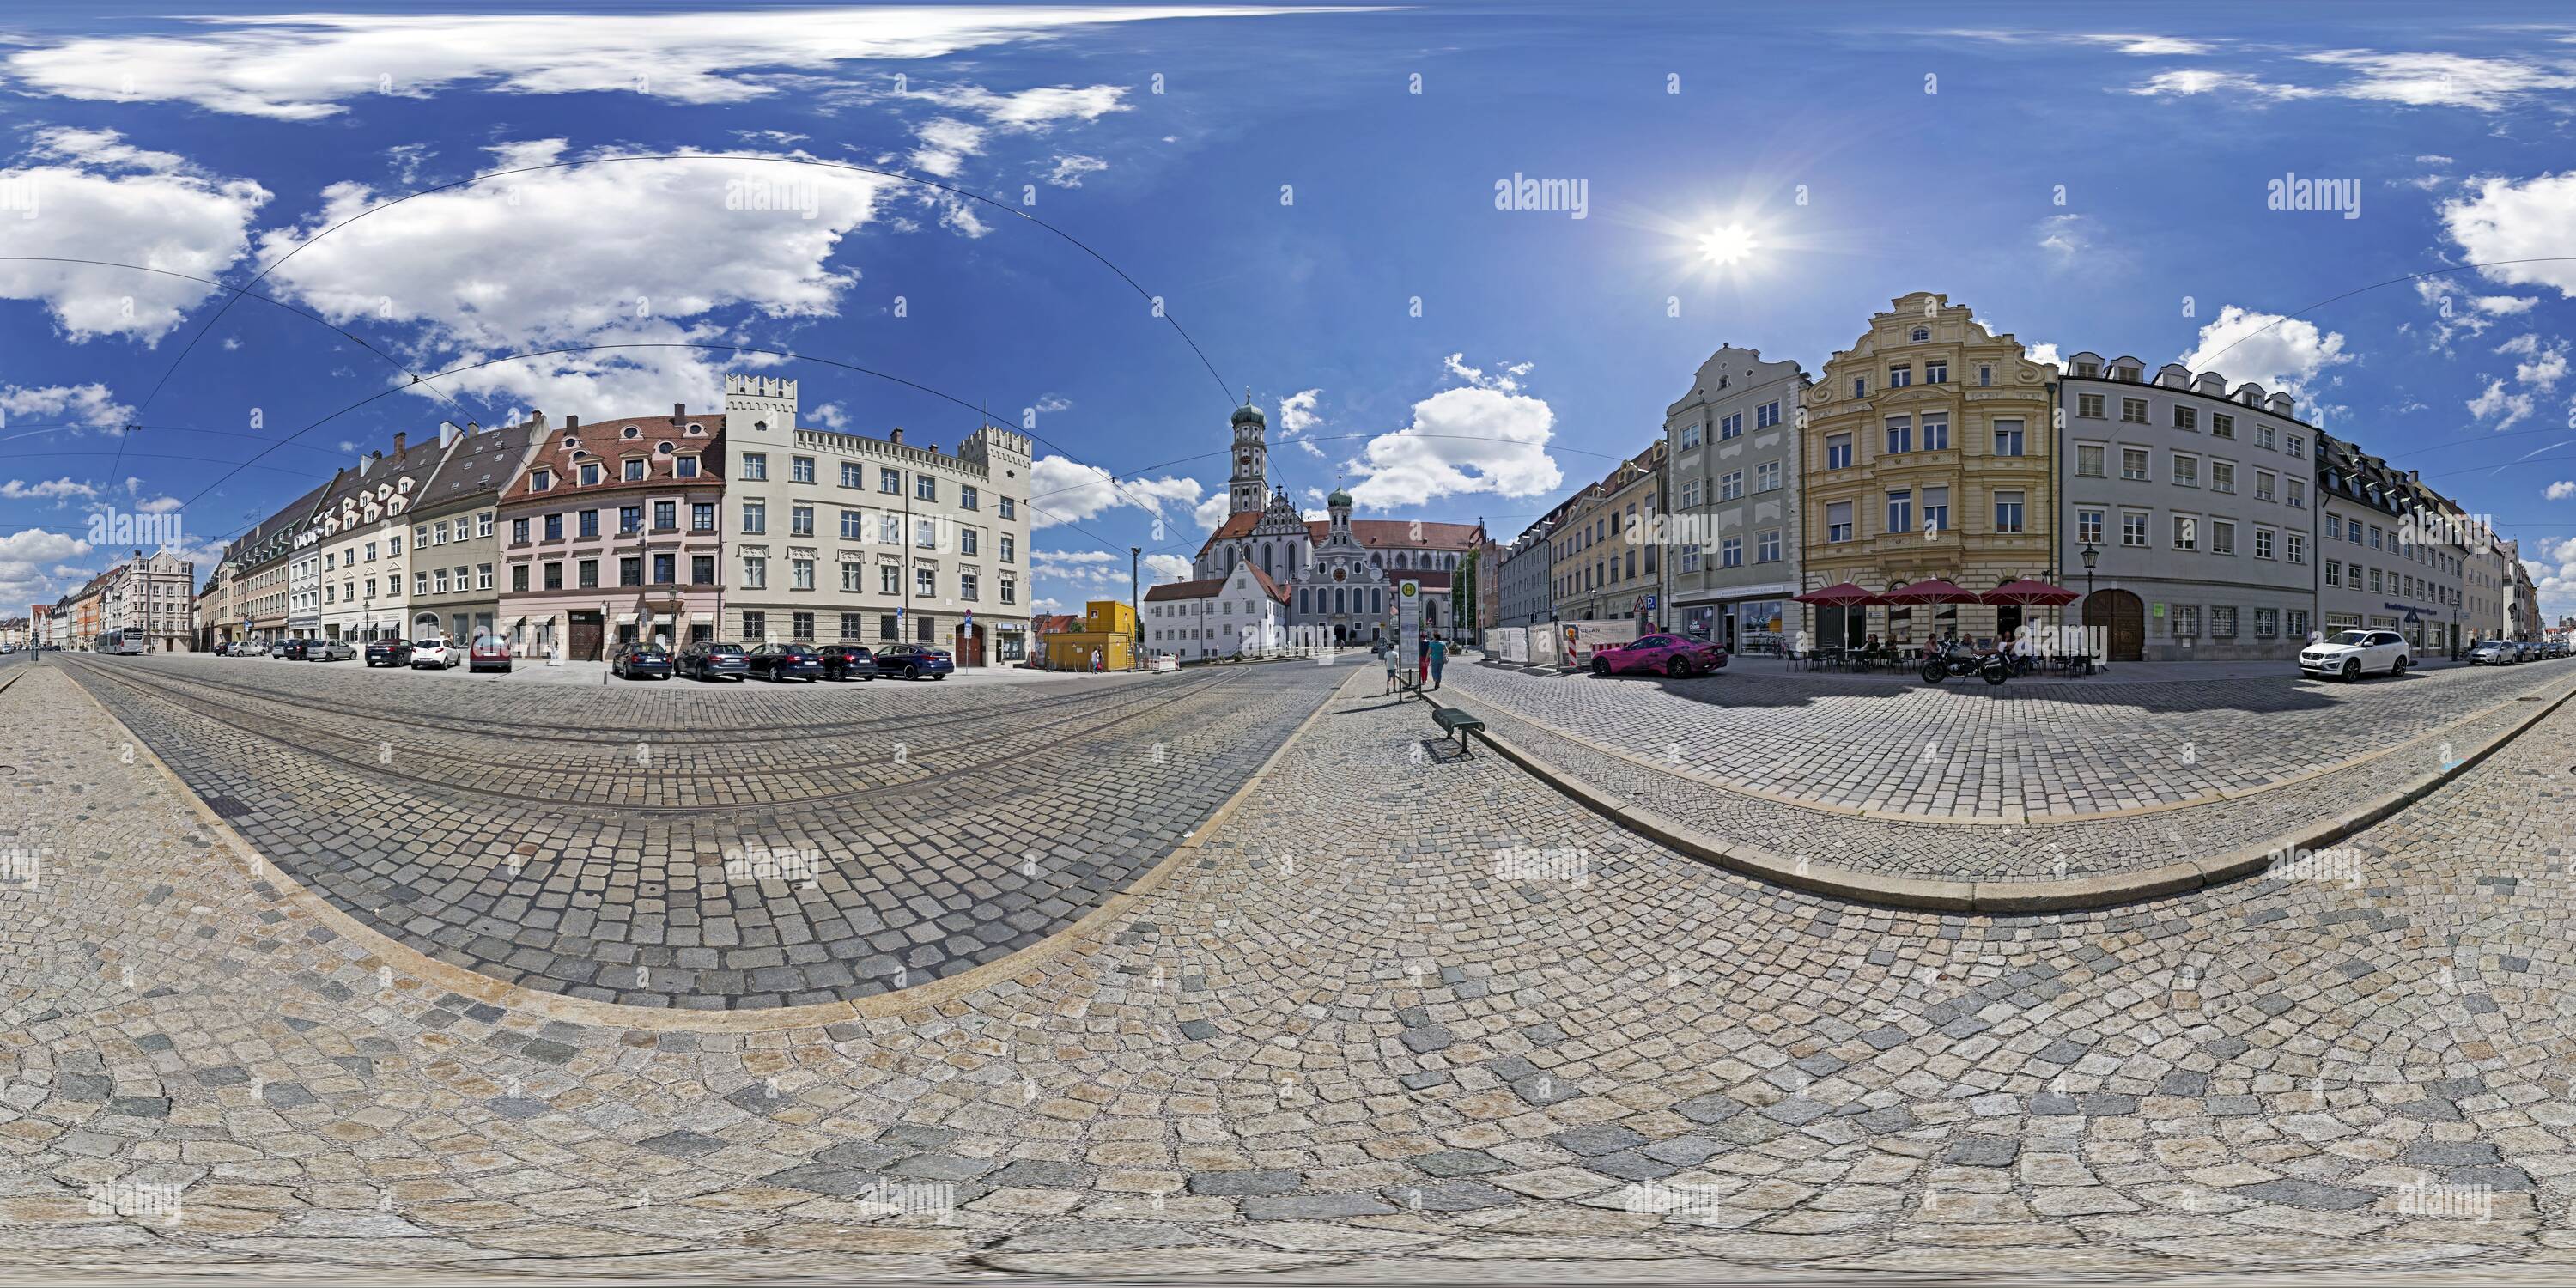 360 degree panoramic view of Augsburg, Ulrich Square